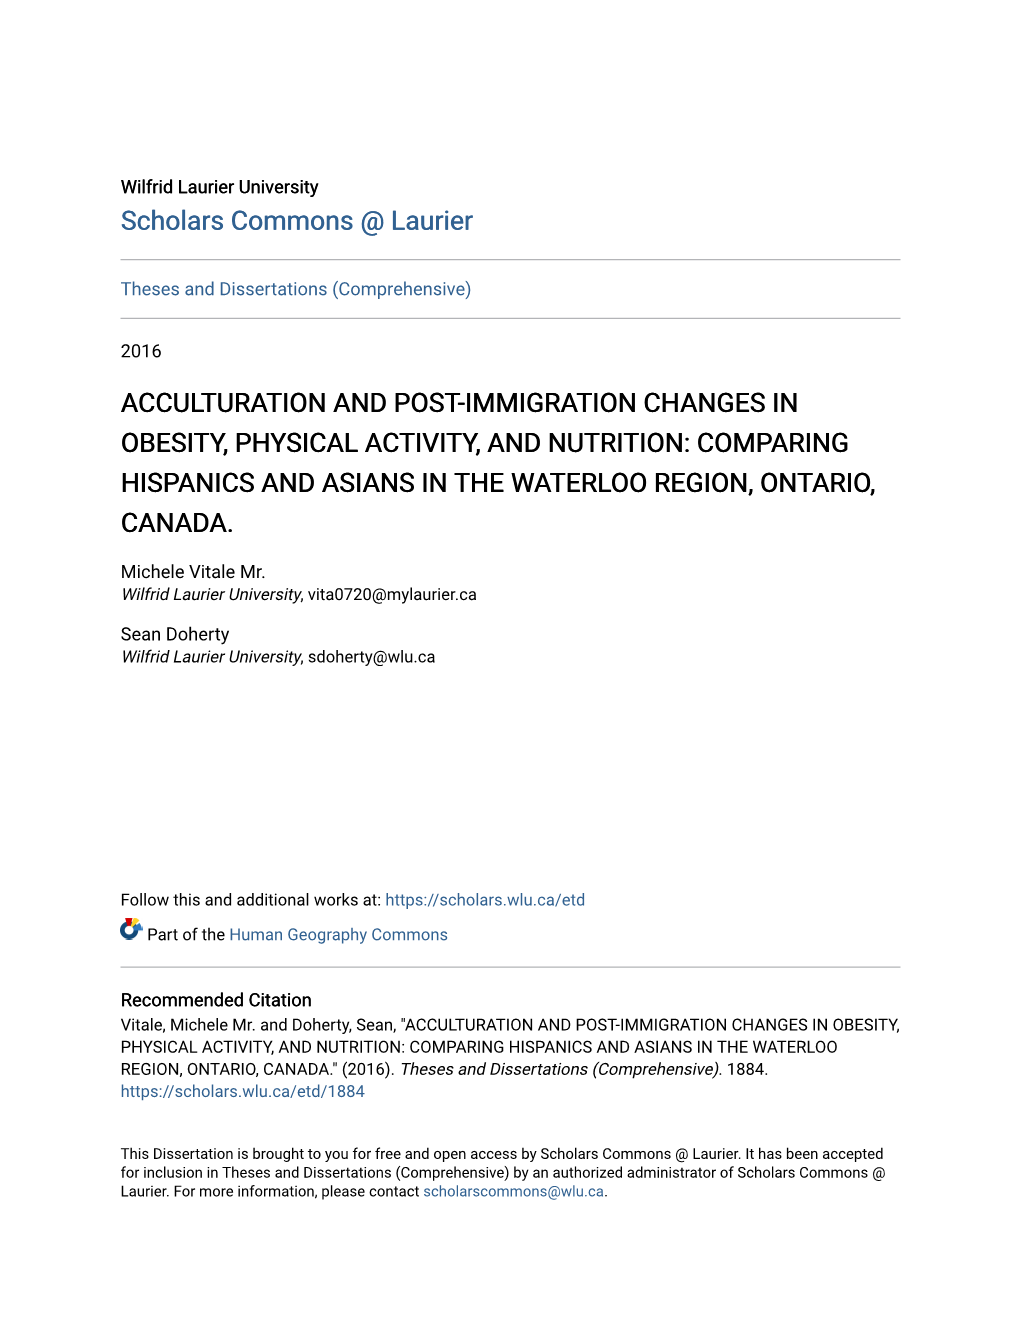 Acculturation and Post-Immigration Changes in Obesity, Physical Activity, and Nutrition: Comparing Hispanics and Asians in the Waterloo Region, Ontario, Canada